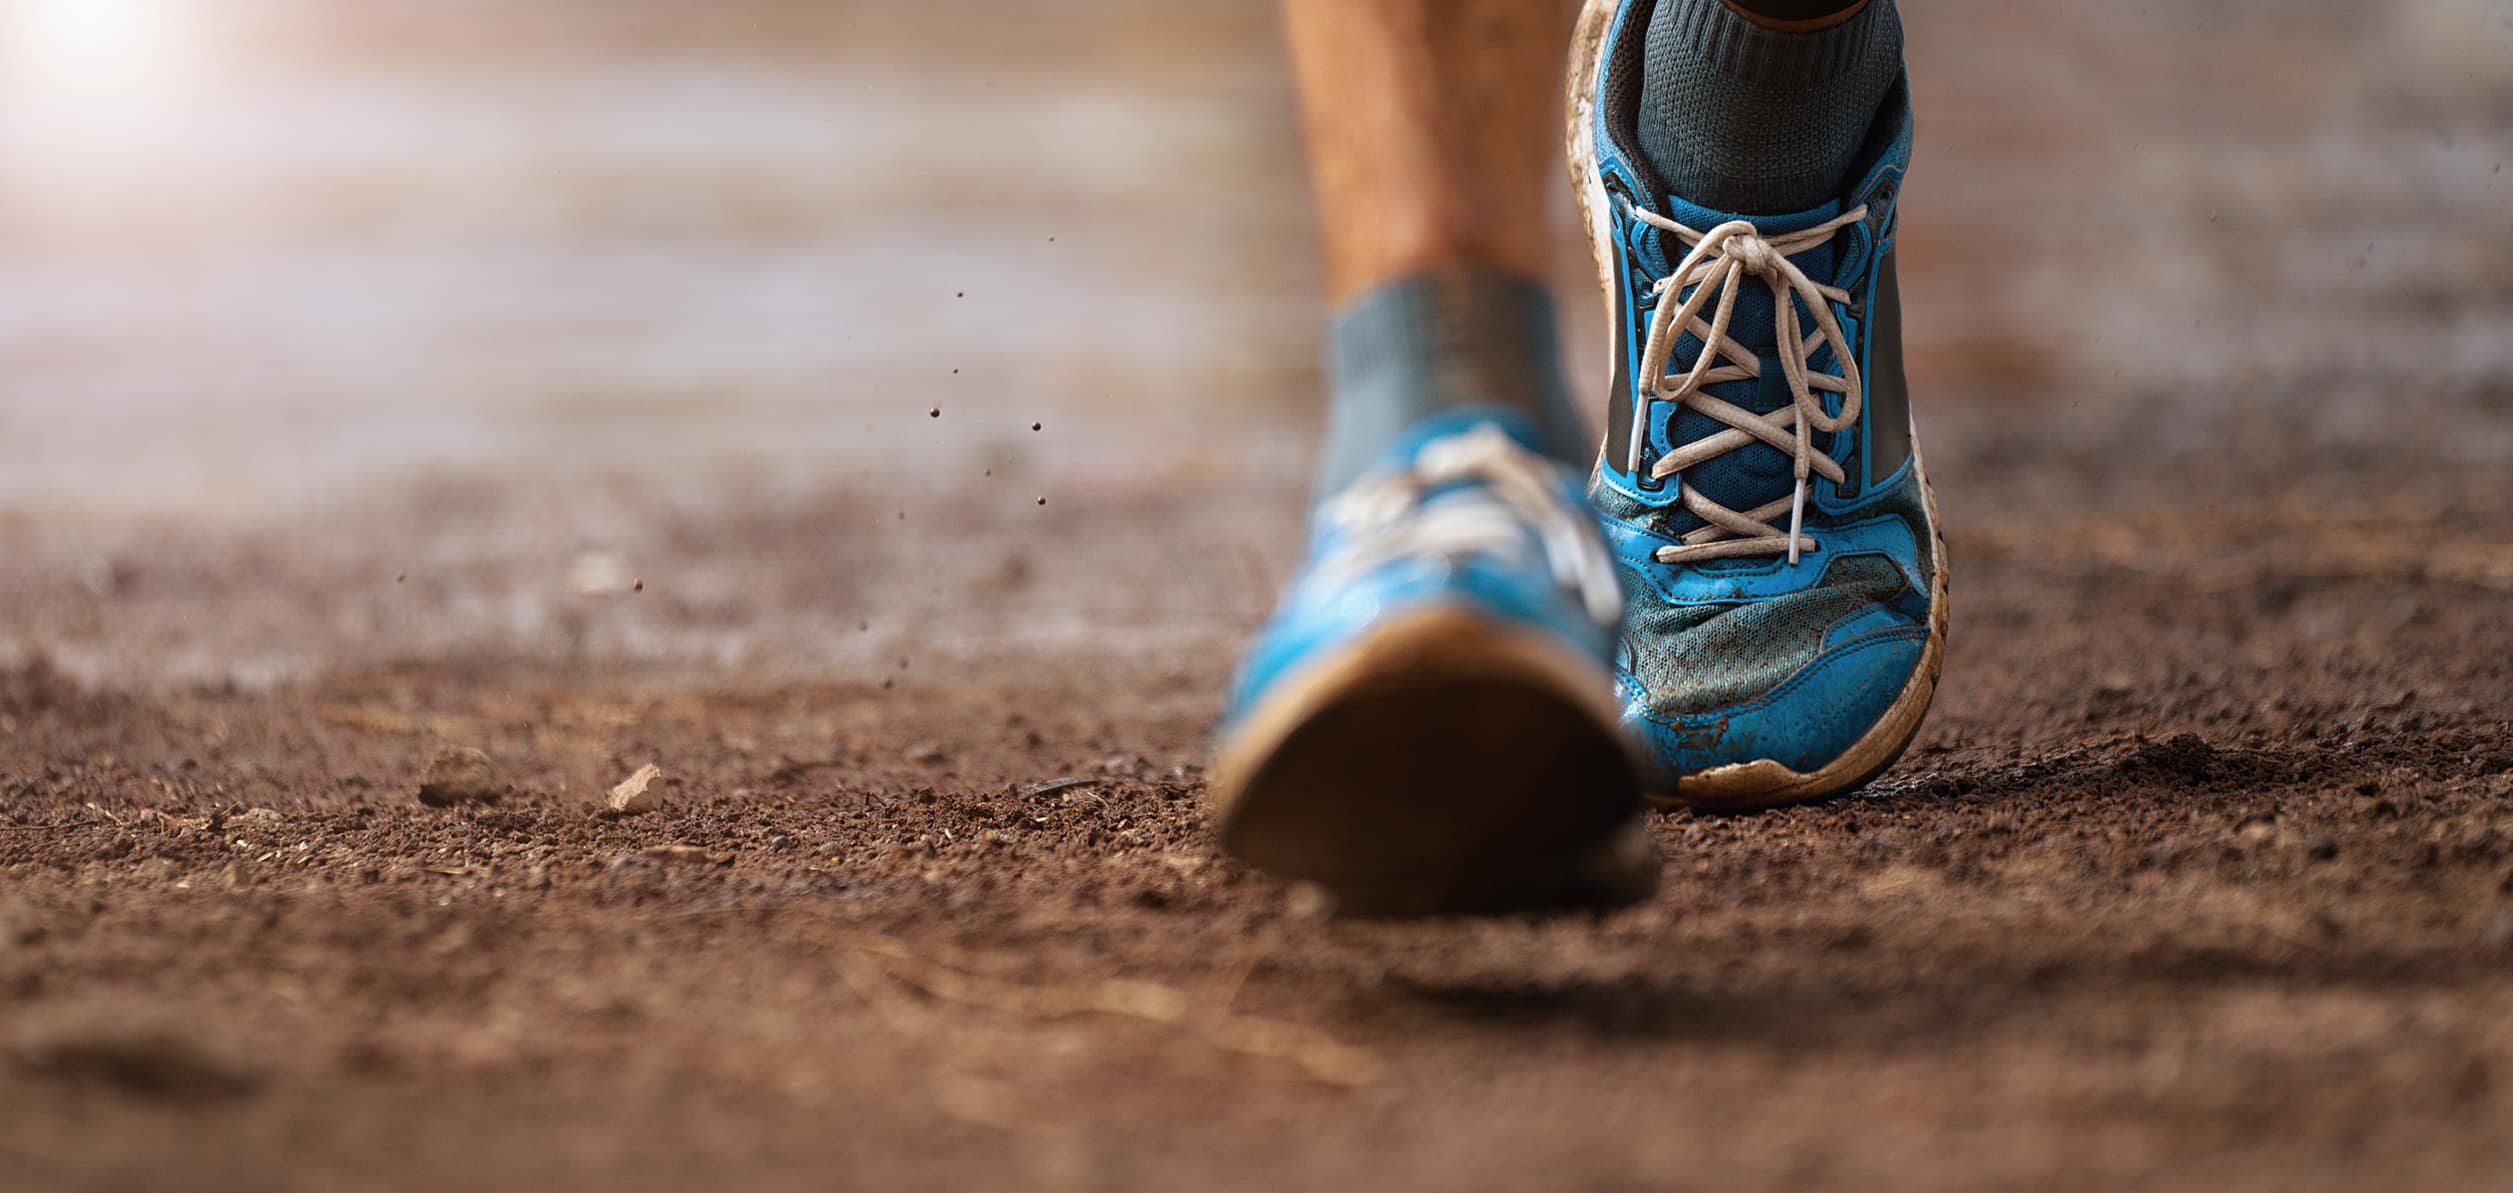 athletic shoes walking on a dirt track